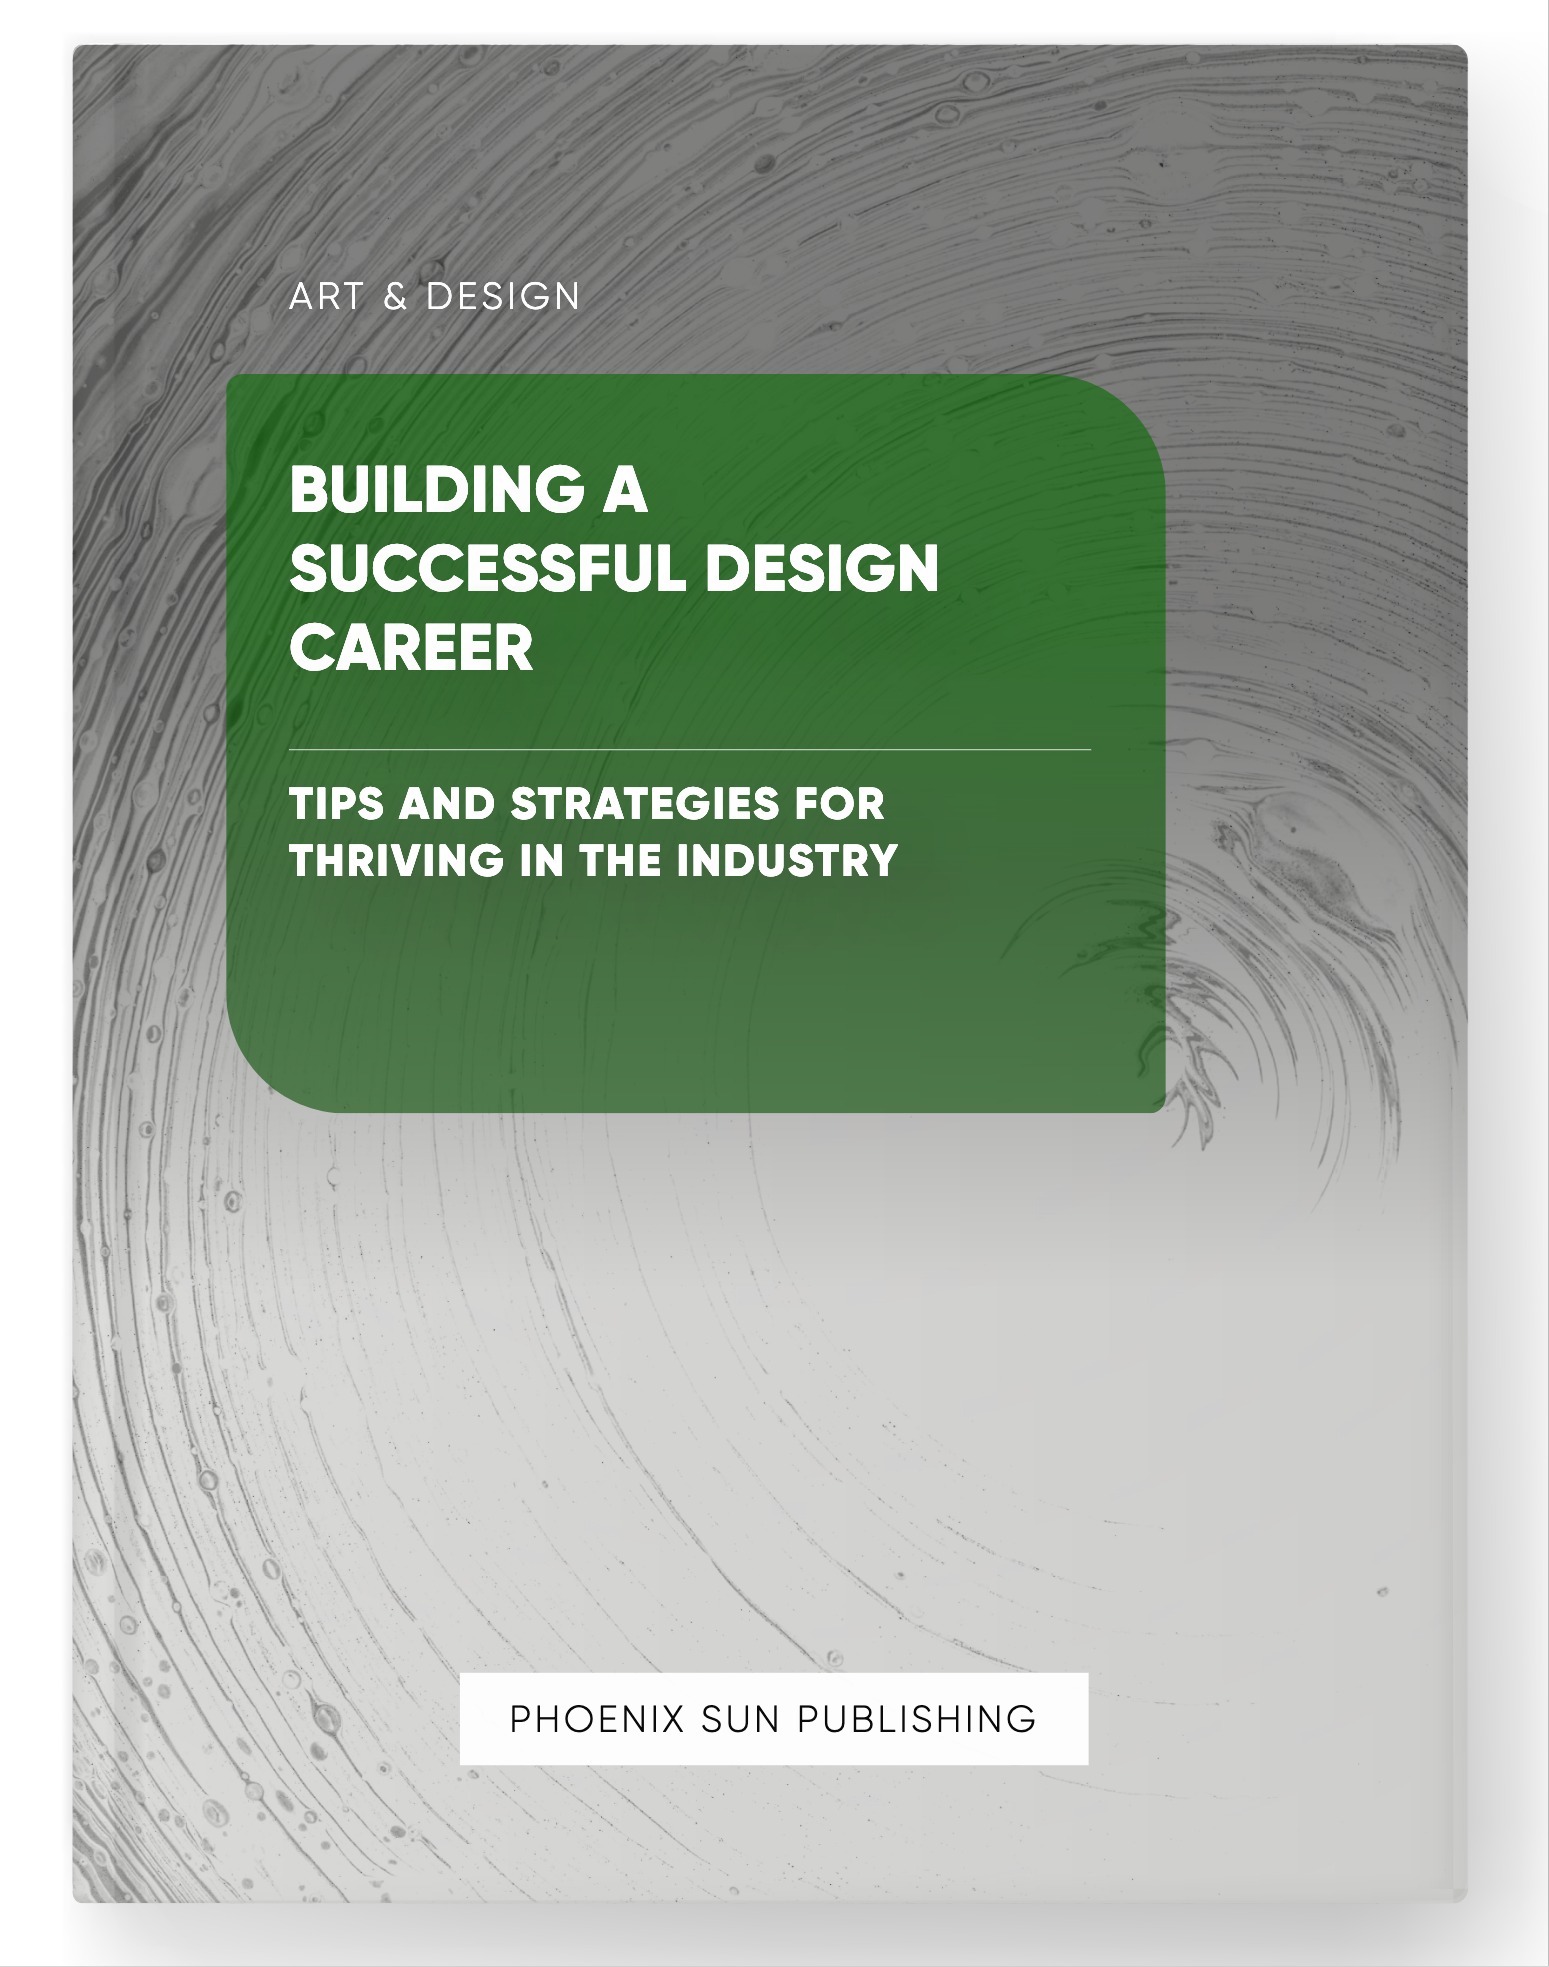 Building a Successful Design Career – Tips and Strategies for Thriving in the Industry